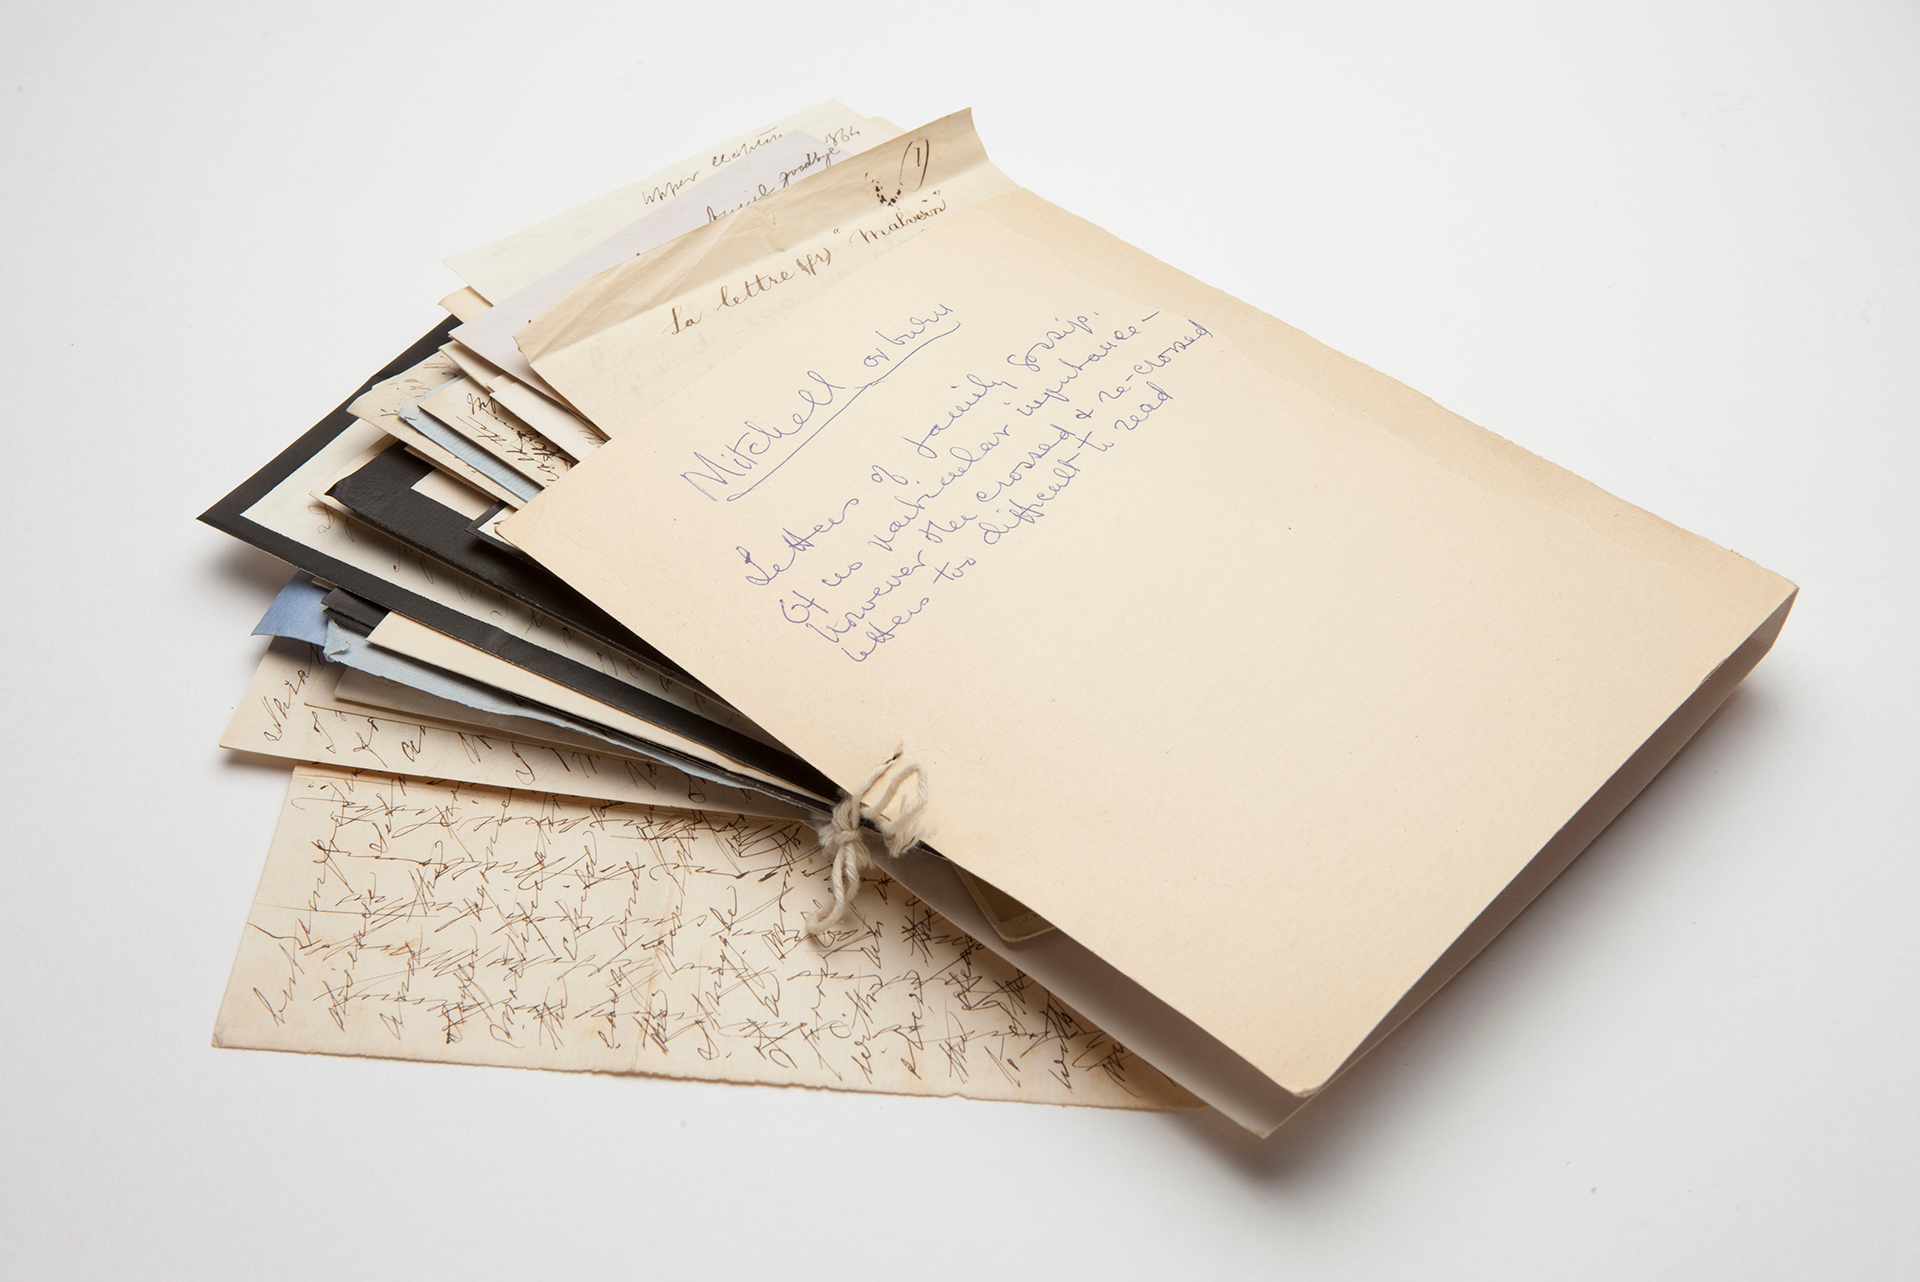 A file folder with several documents within.